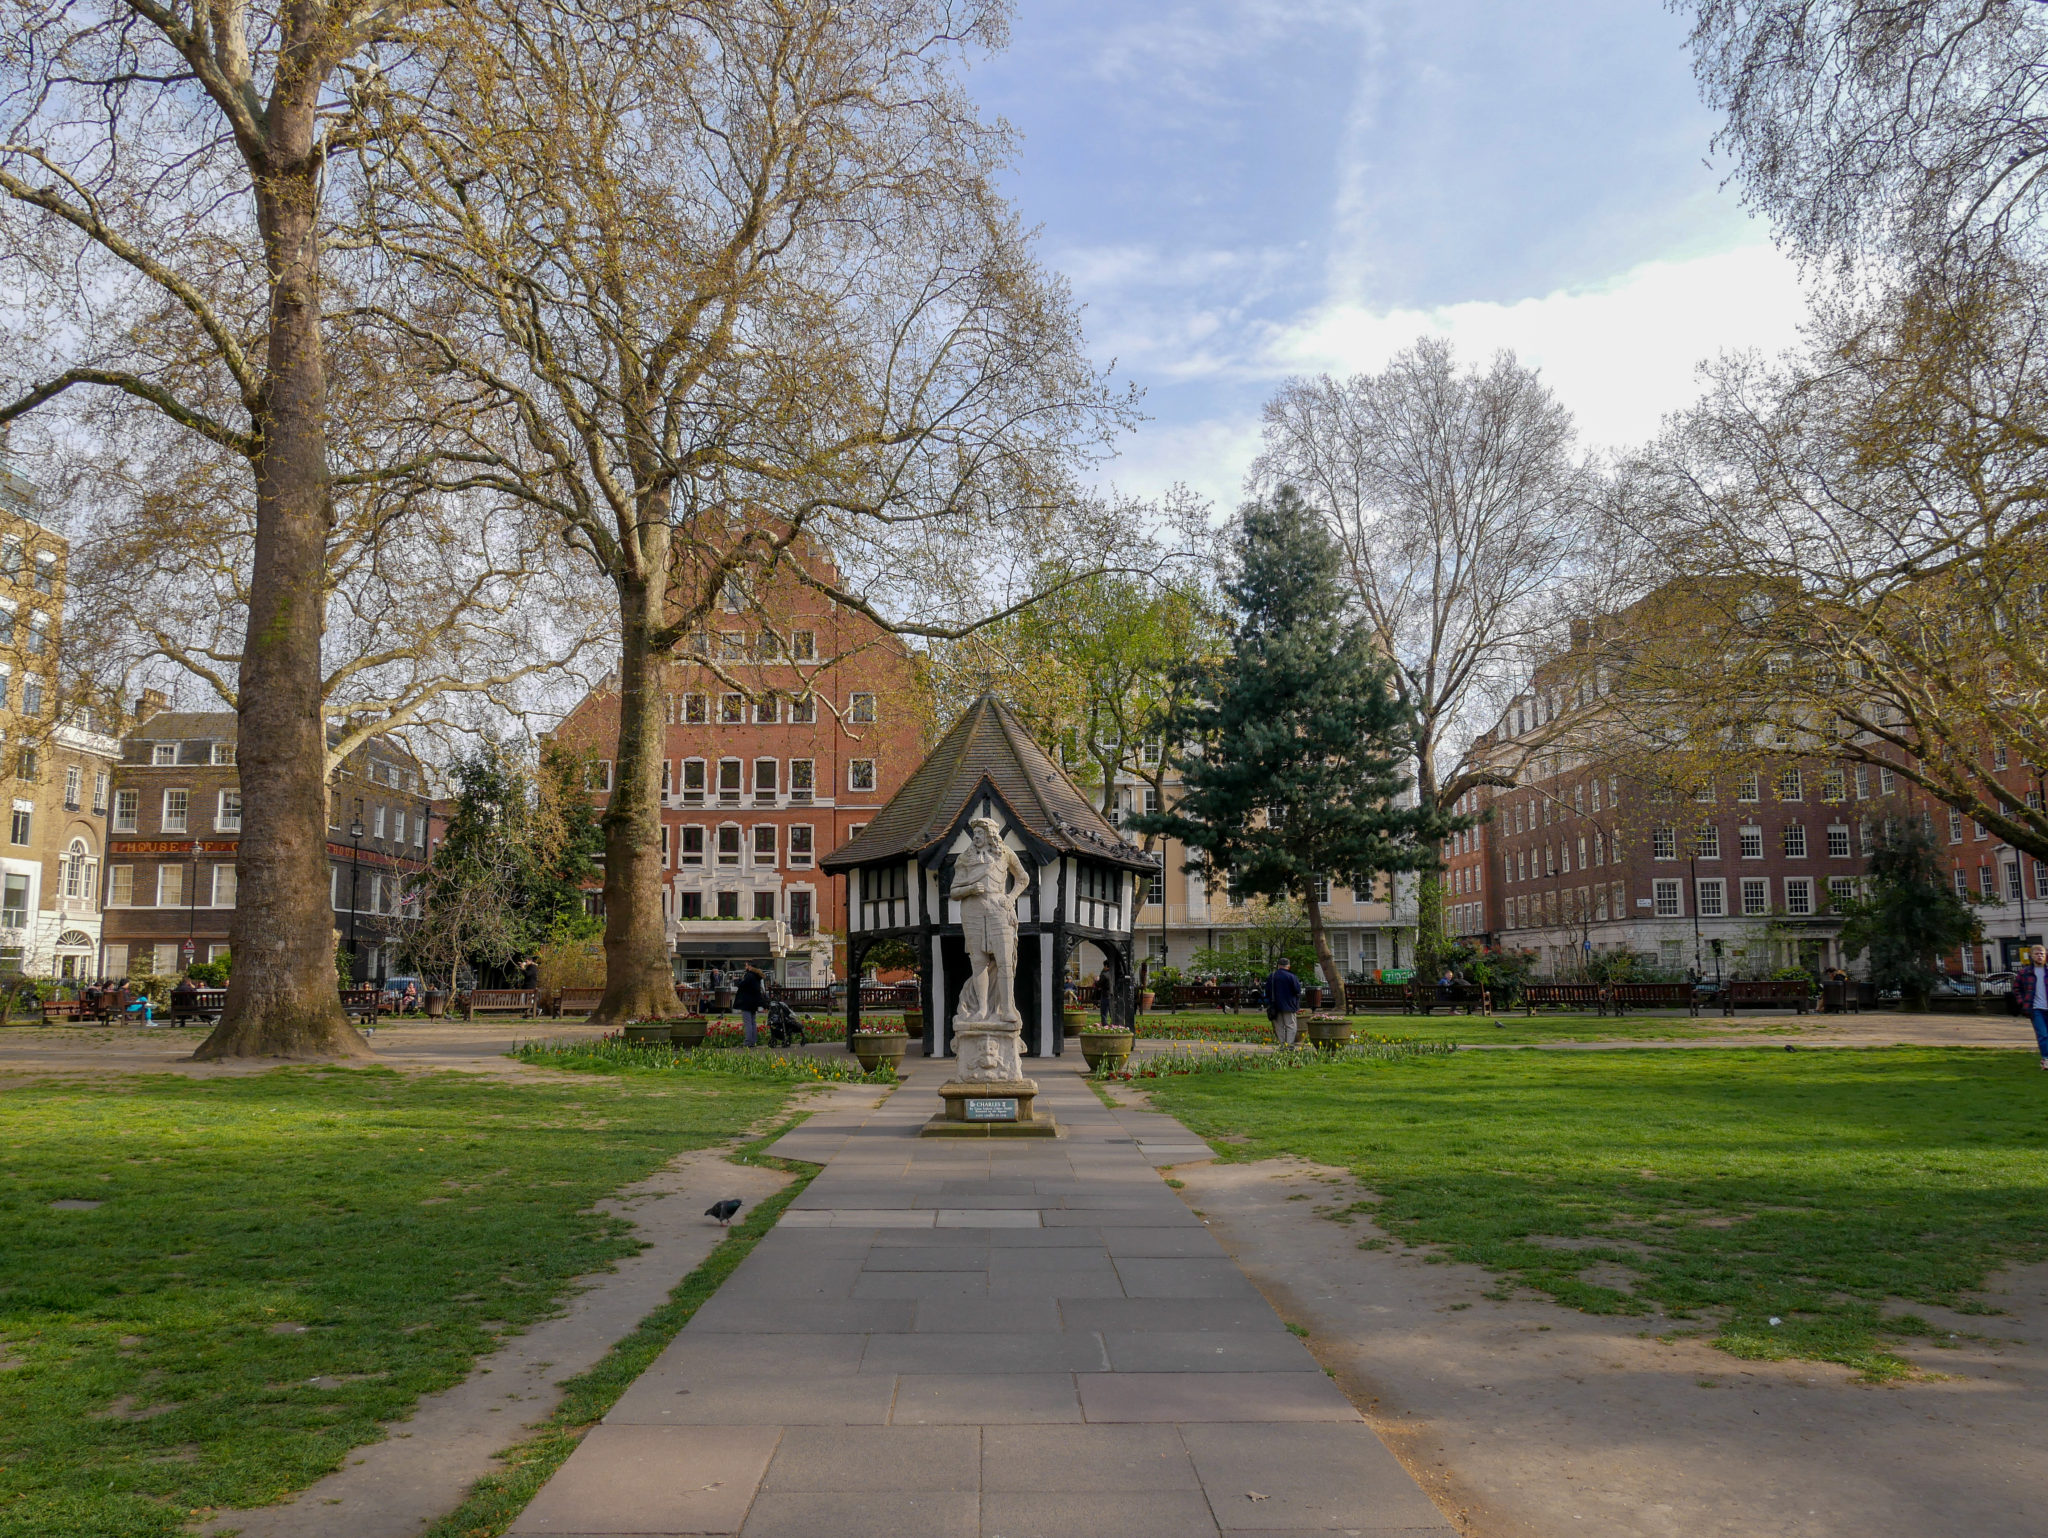 Soho Square Gardens with a statue of Charles II in front of the wooden mock market-cross building, Soho, London